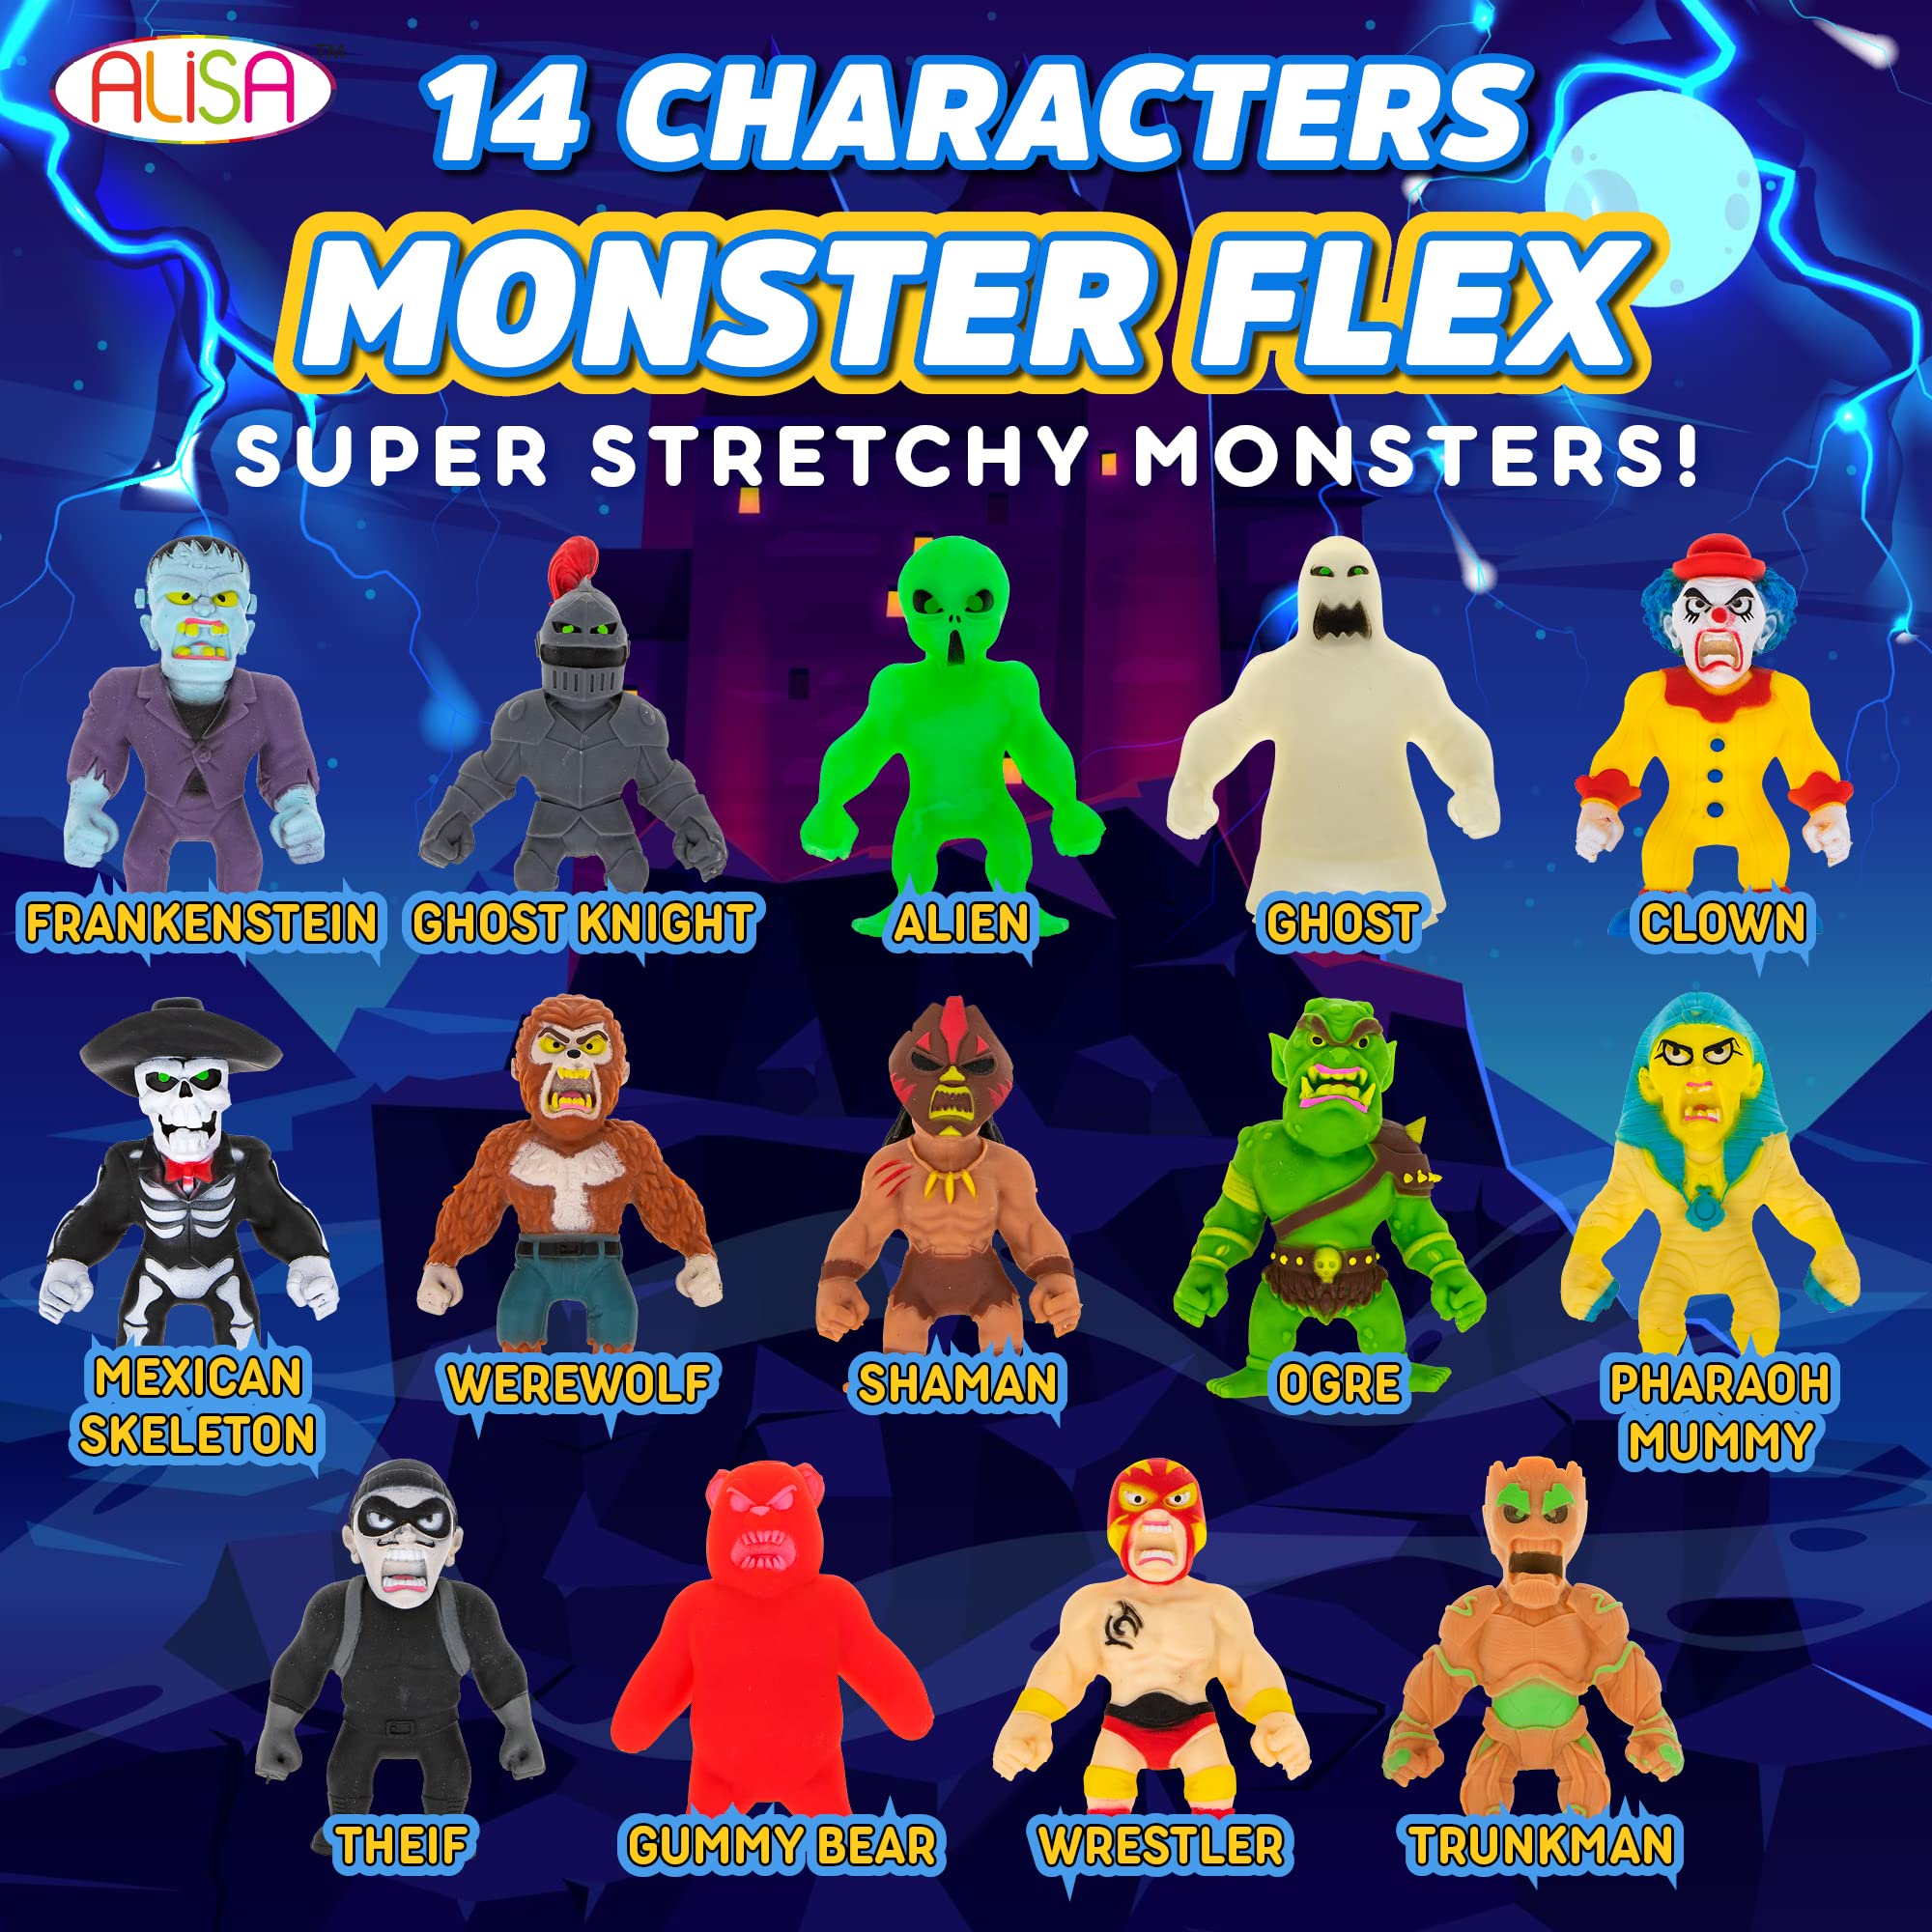 ALISA Monster Flex Stretchy Toys for Boys and Girls - 14 Unique Spooky Stretch Monsters - Monster Stretch Guy Toys for Kids Birthday Gift Party Favors, Sensory Fidget Stress Toys for Kids - Series 3